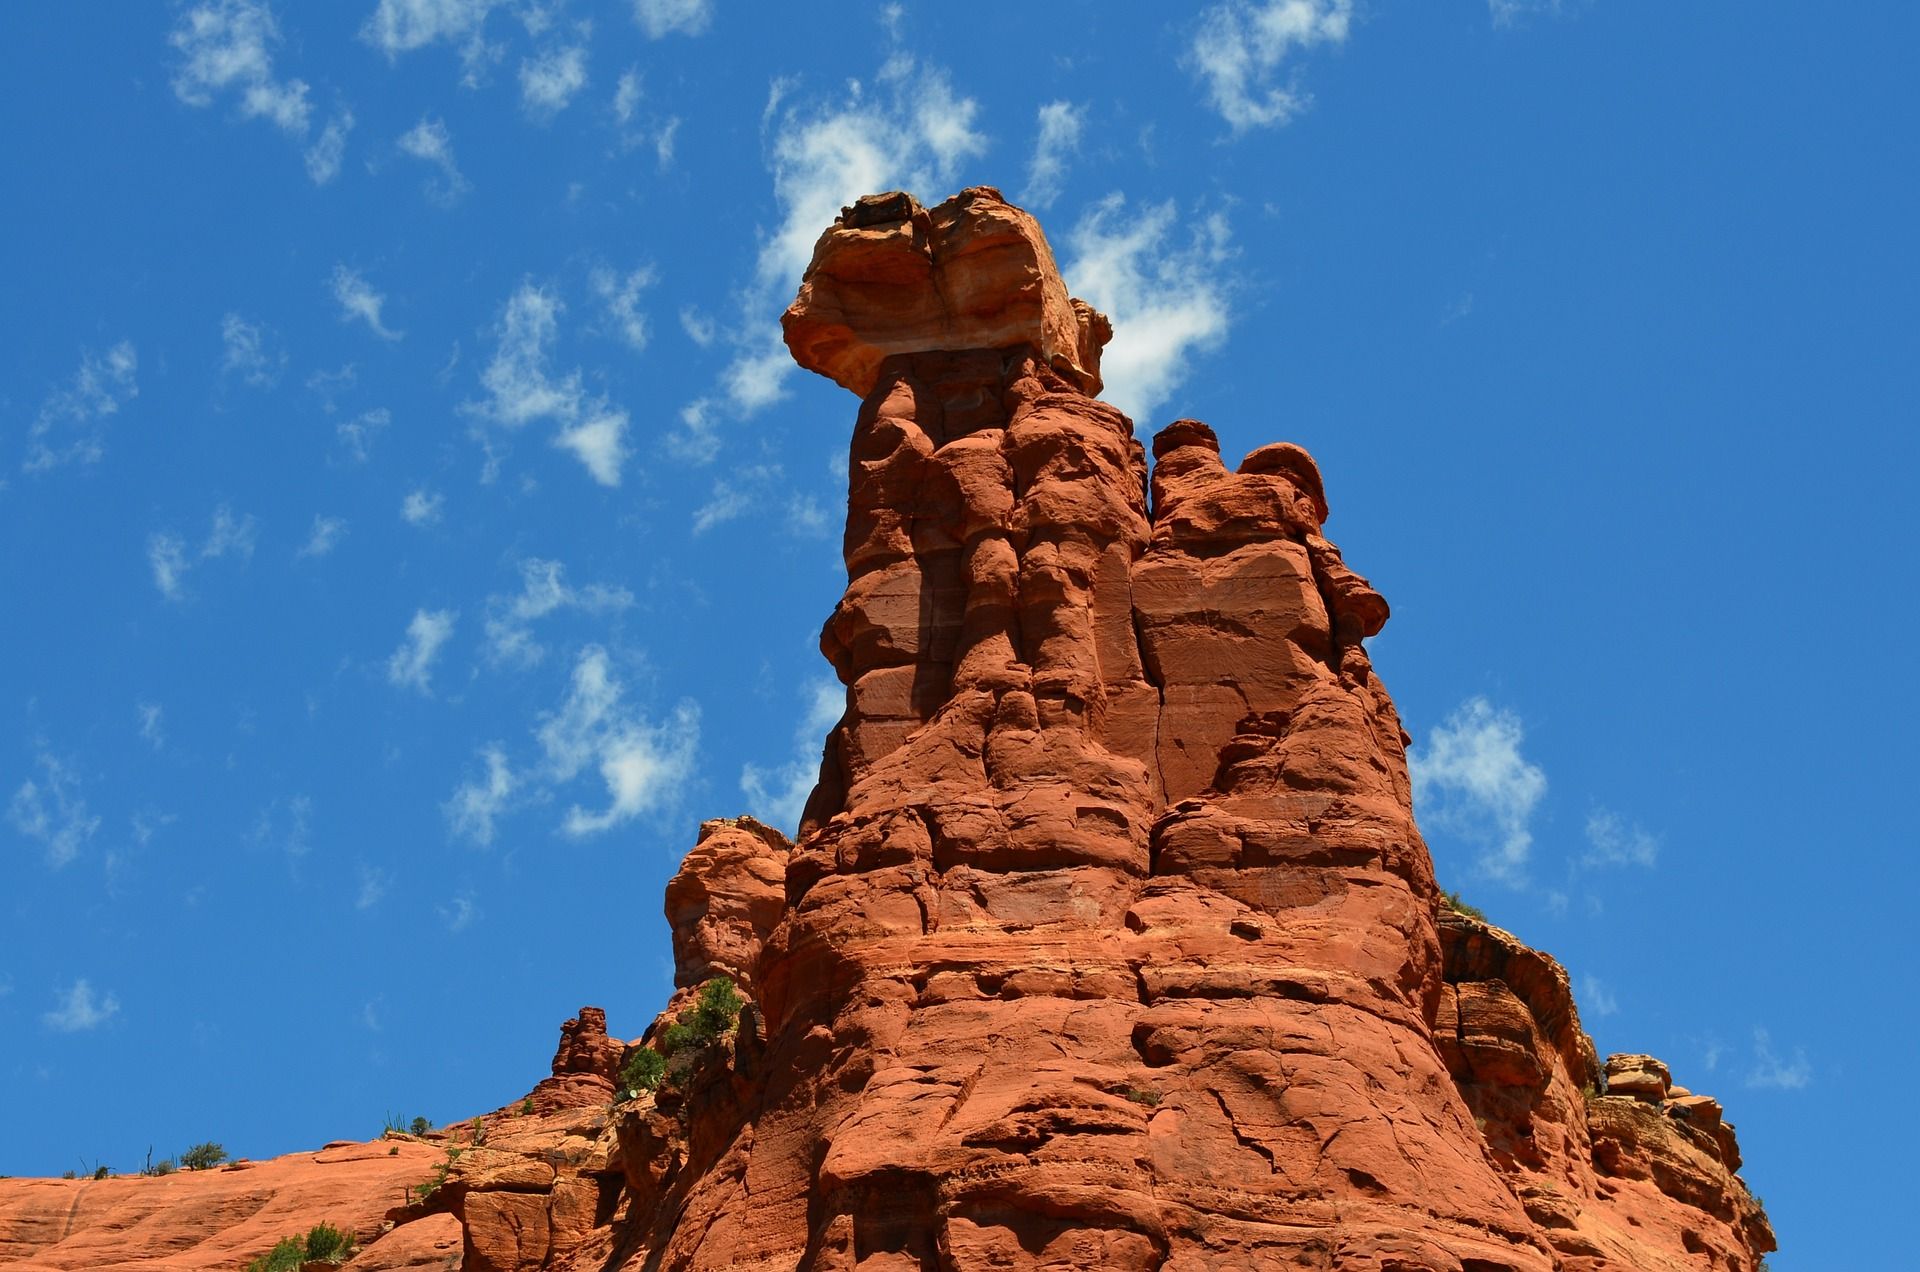 A towering red rock signifying one of Sedona's Vortexes